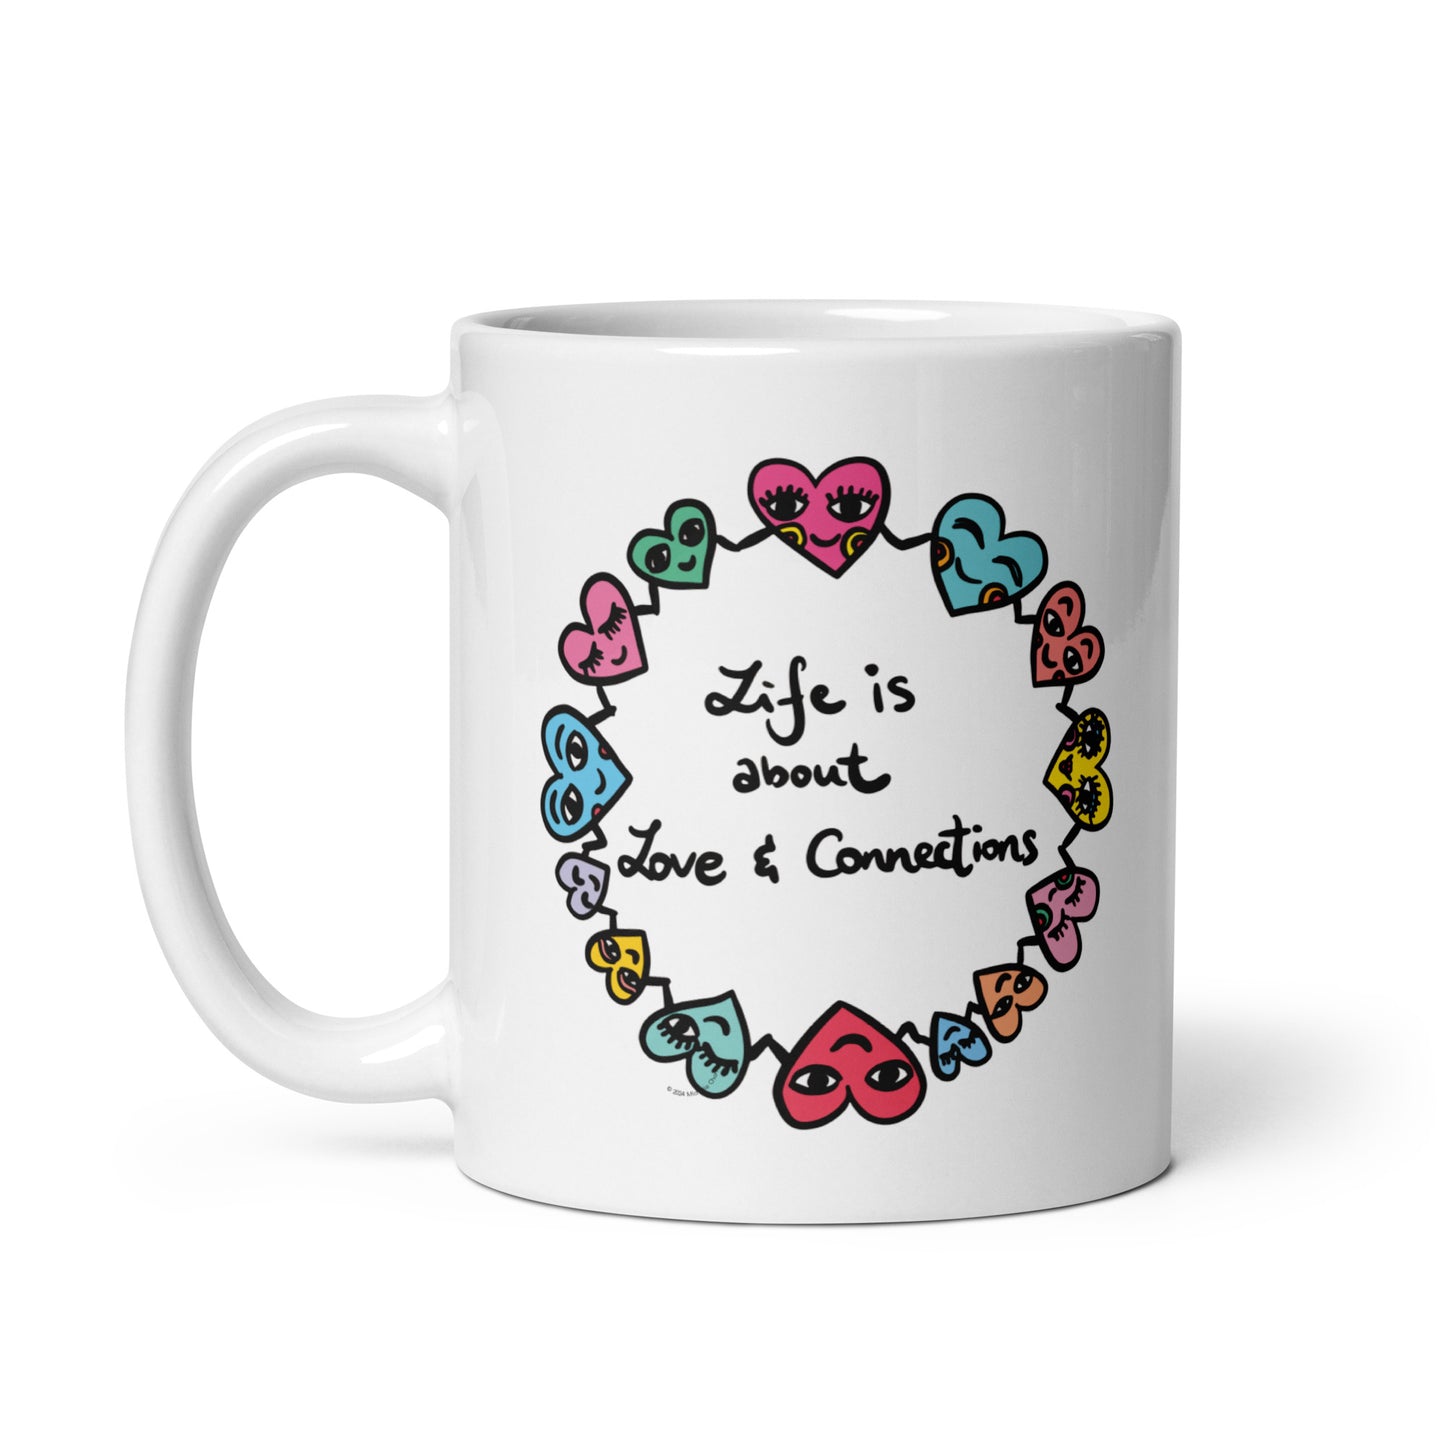 "Life is about Love & Connections" White Glossy Mug